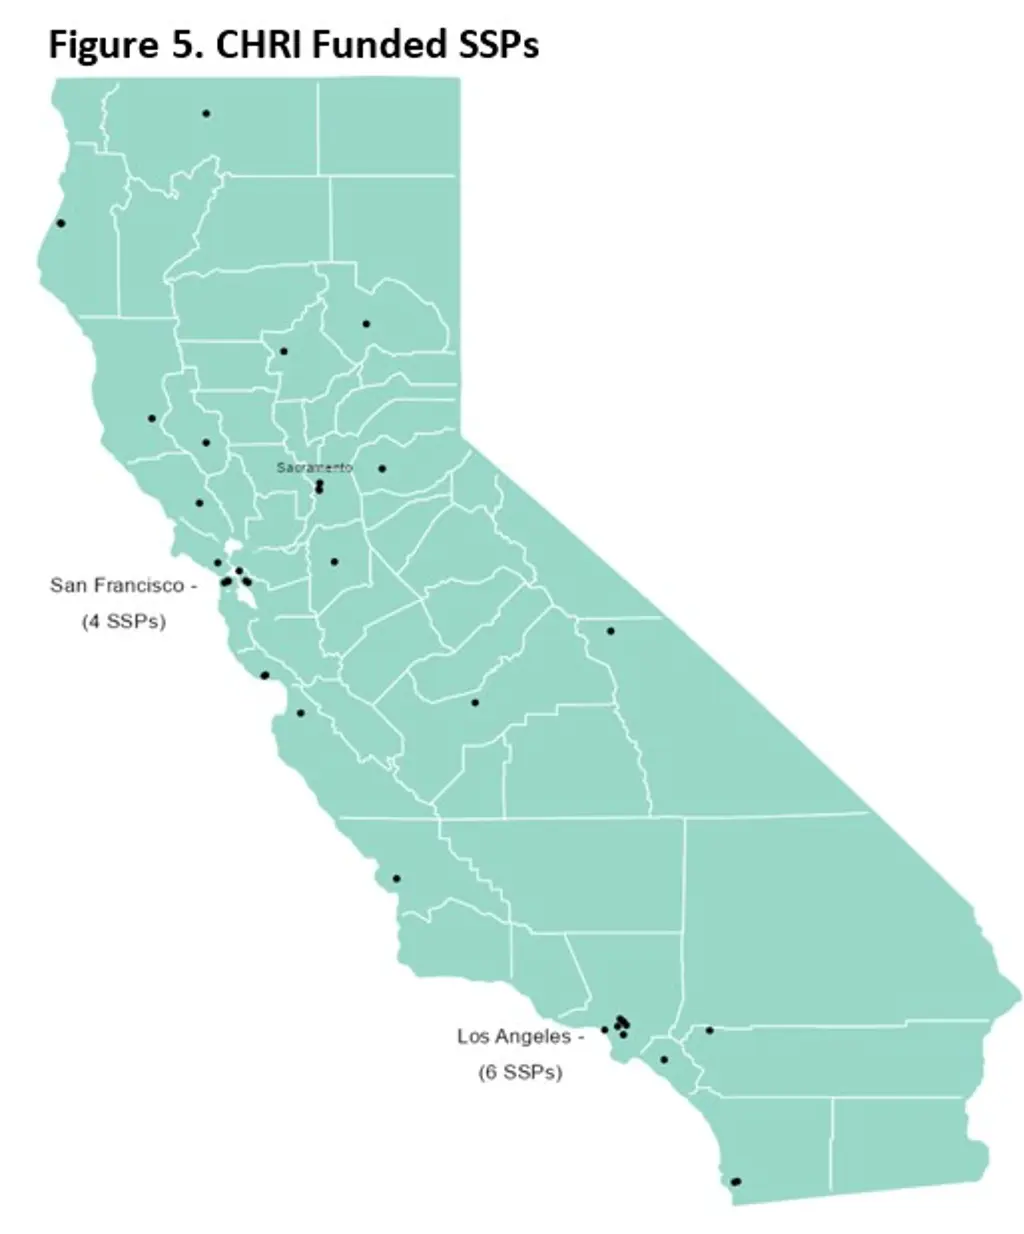 Map shows CHRI-funded SSPs across the state of California.